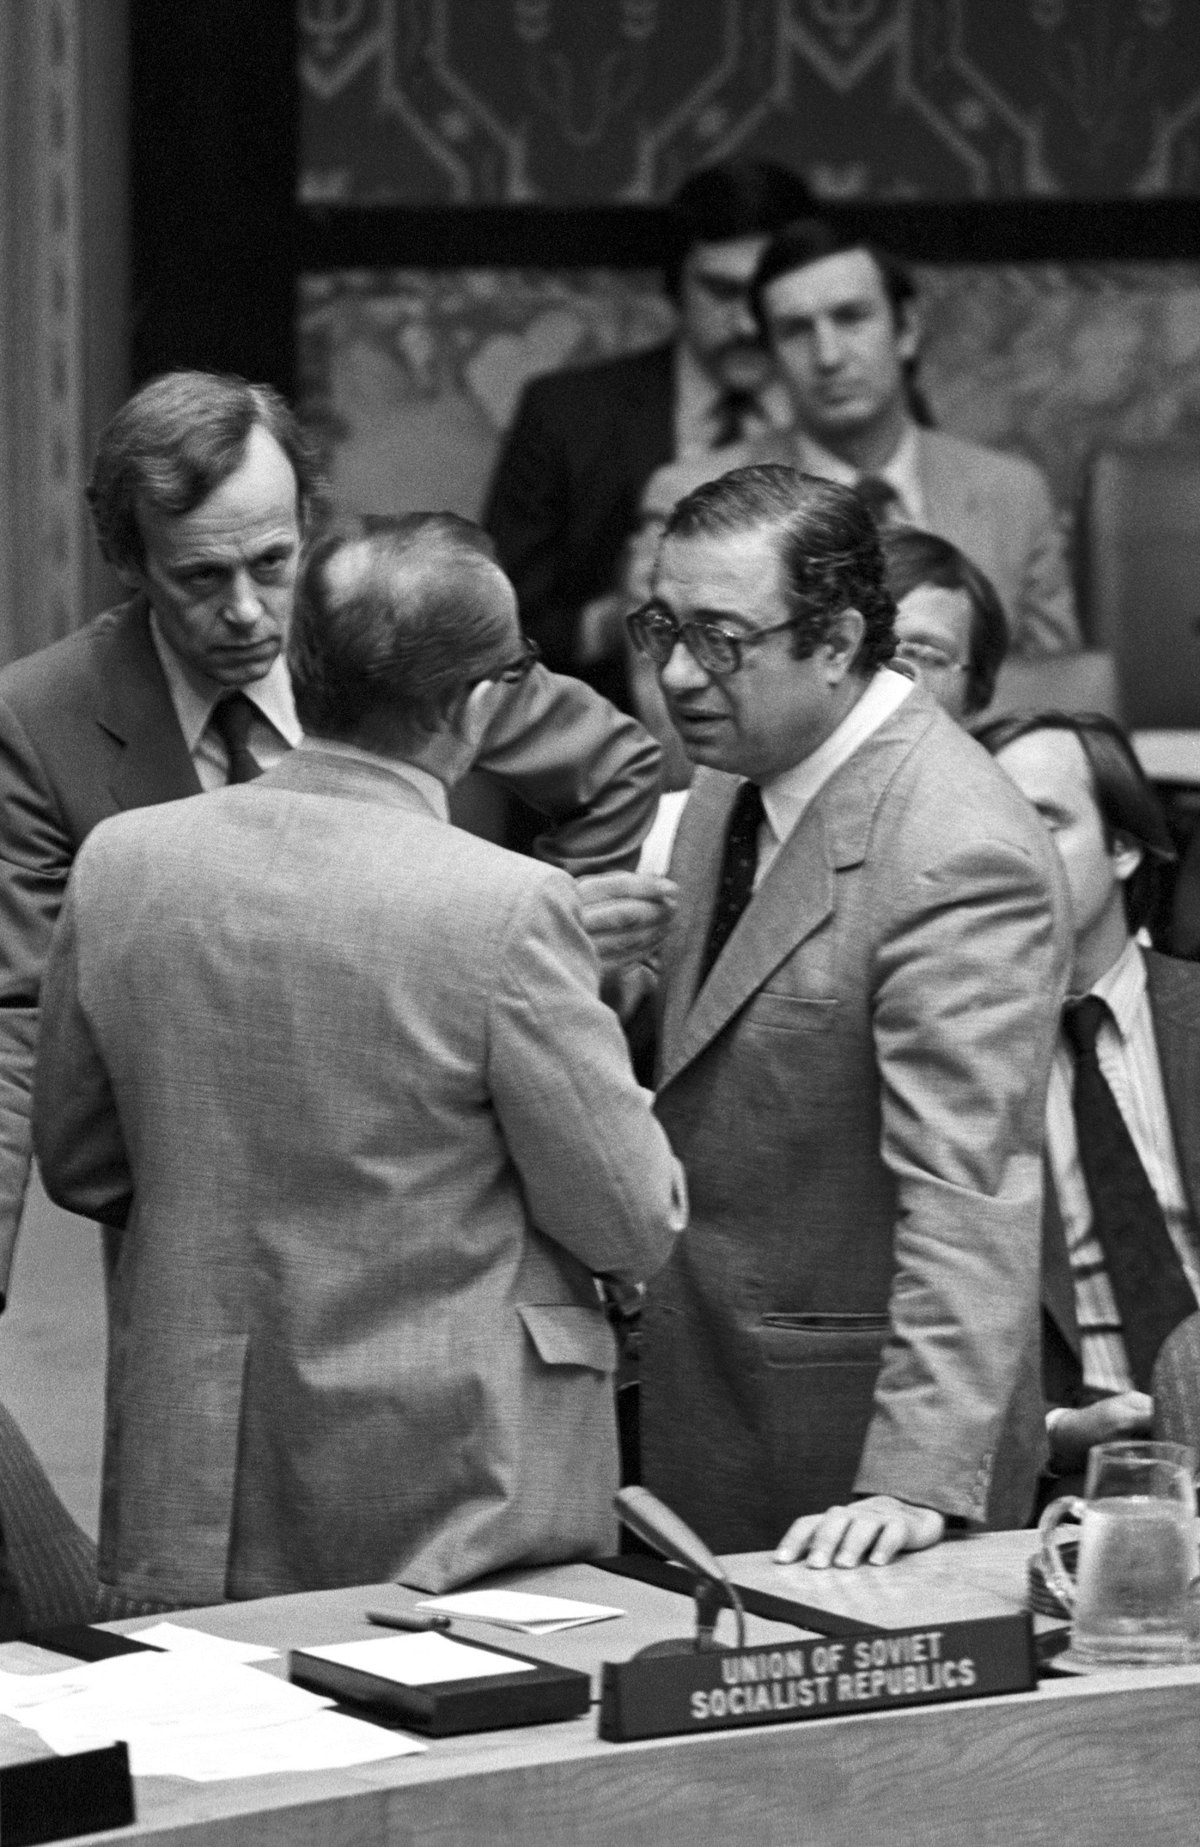 Dr. Clovis Maksoud, on the right, in a 1982 photograph conferring at the United Nations when he was Ambassador for the League of Arab States. (UN Photo/Yutaka Nagata)